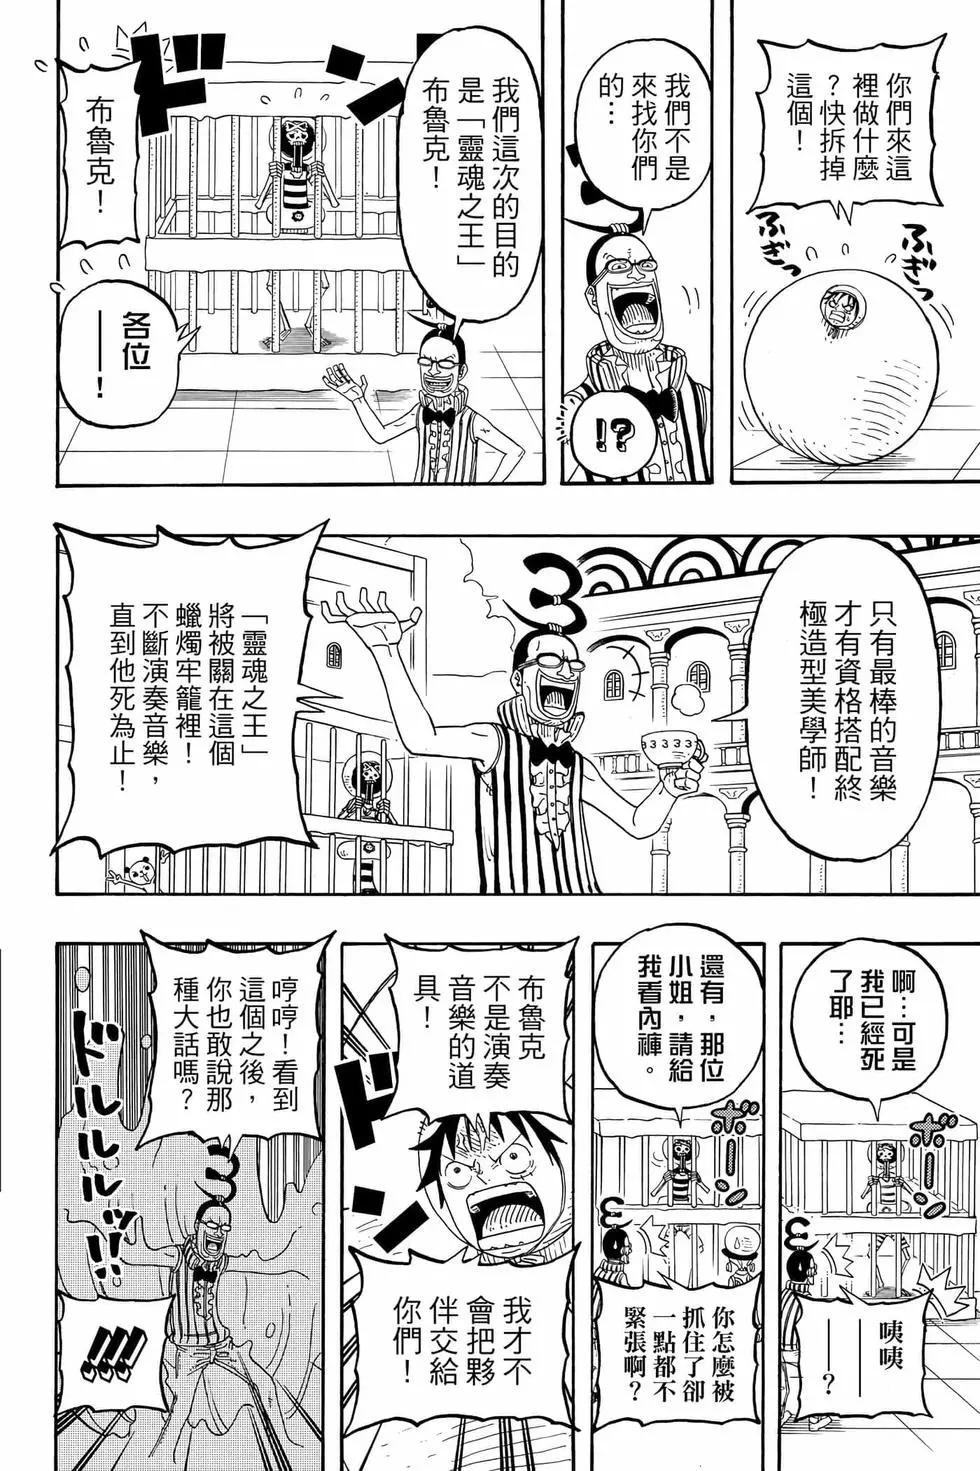 One piece party - 第04卷(2/4) - 5